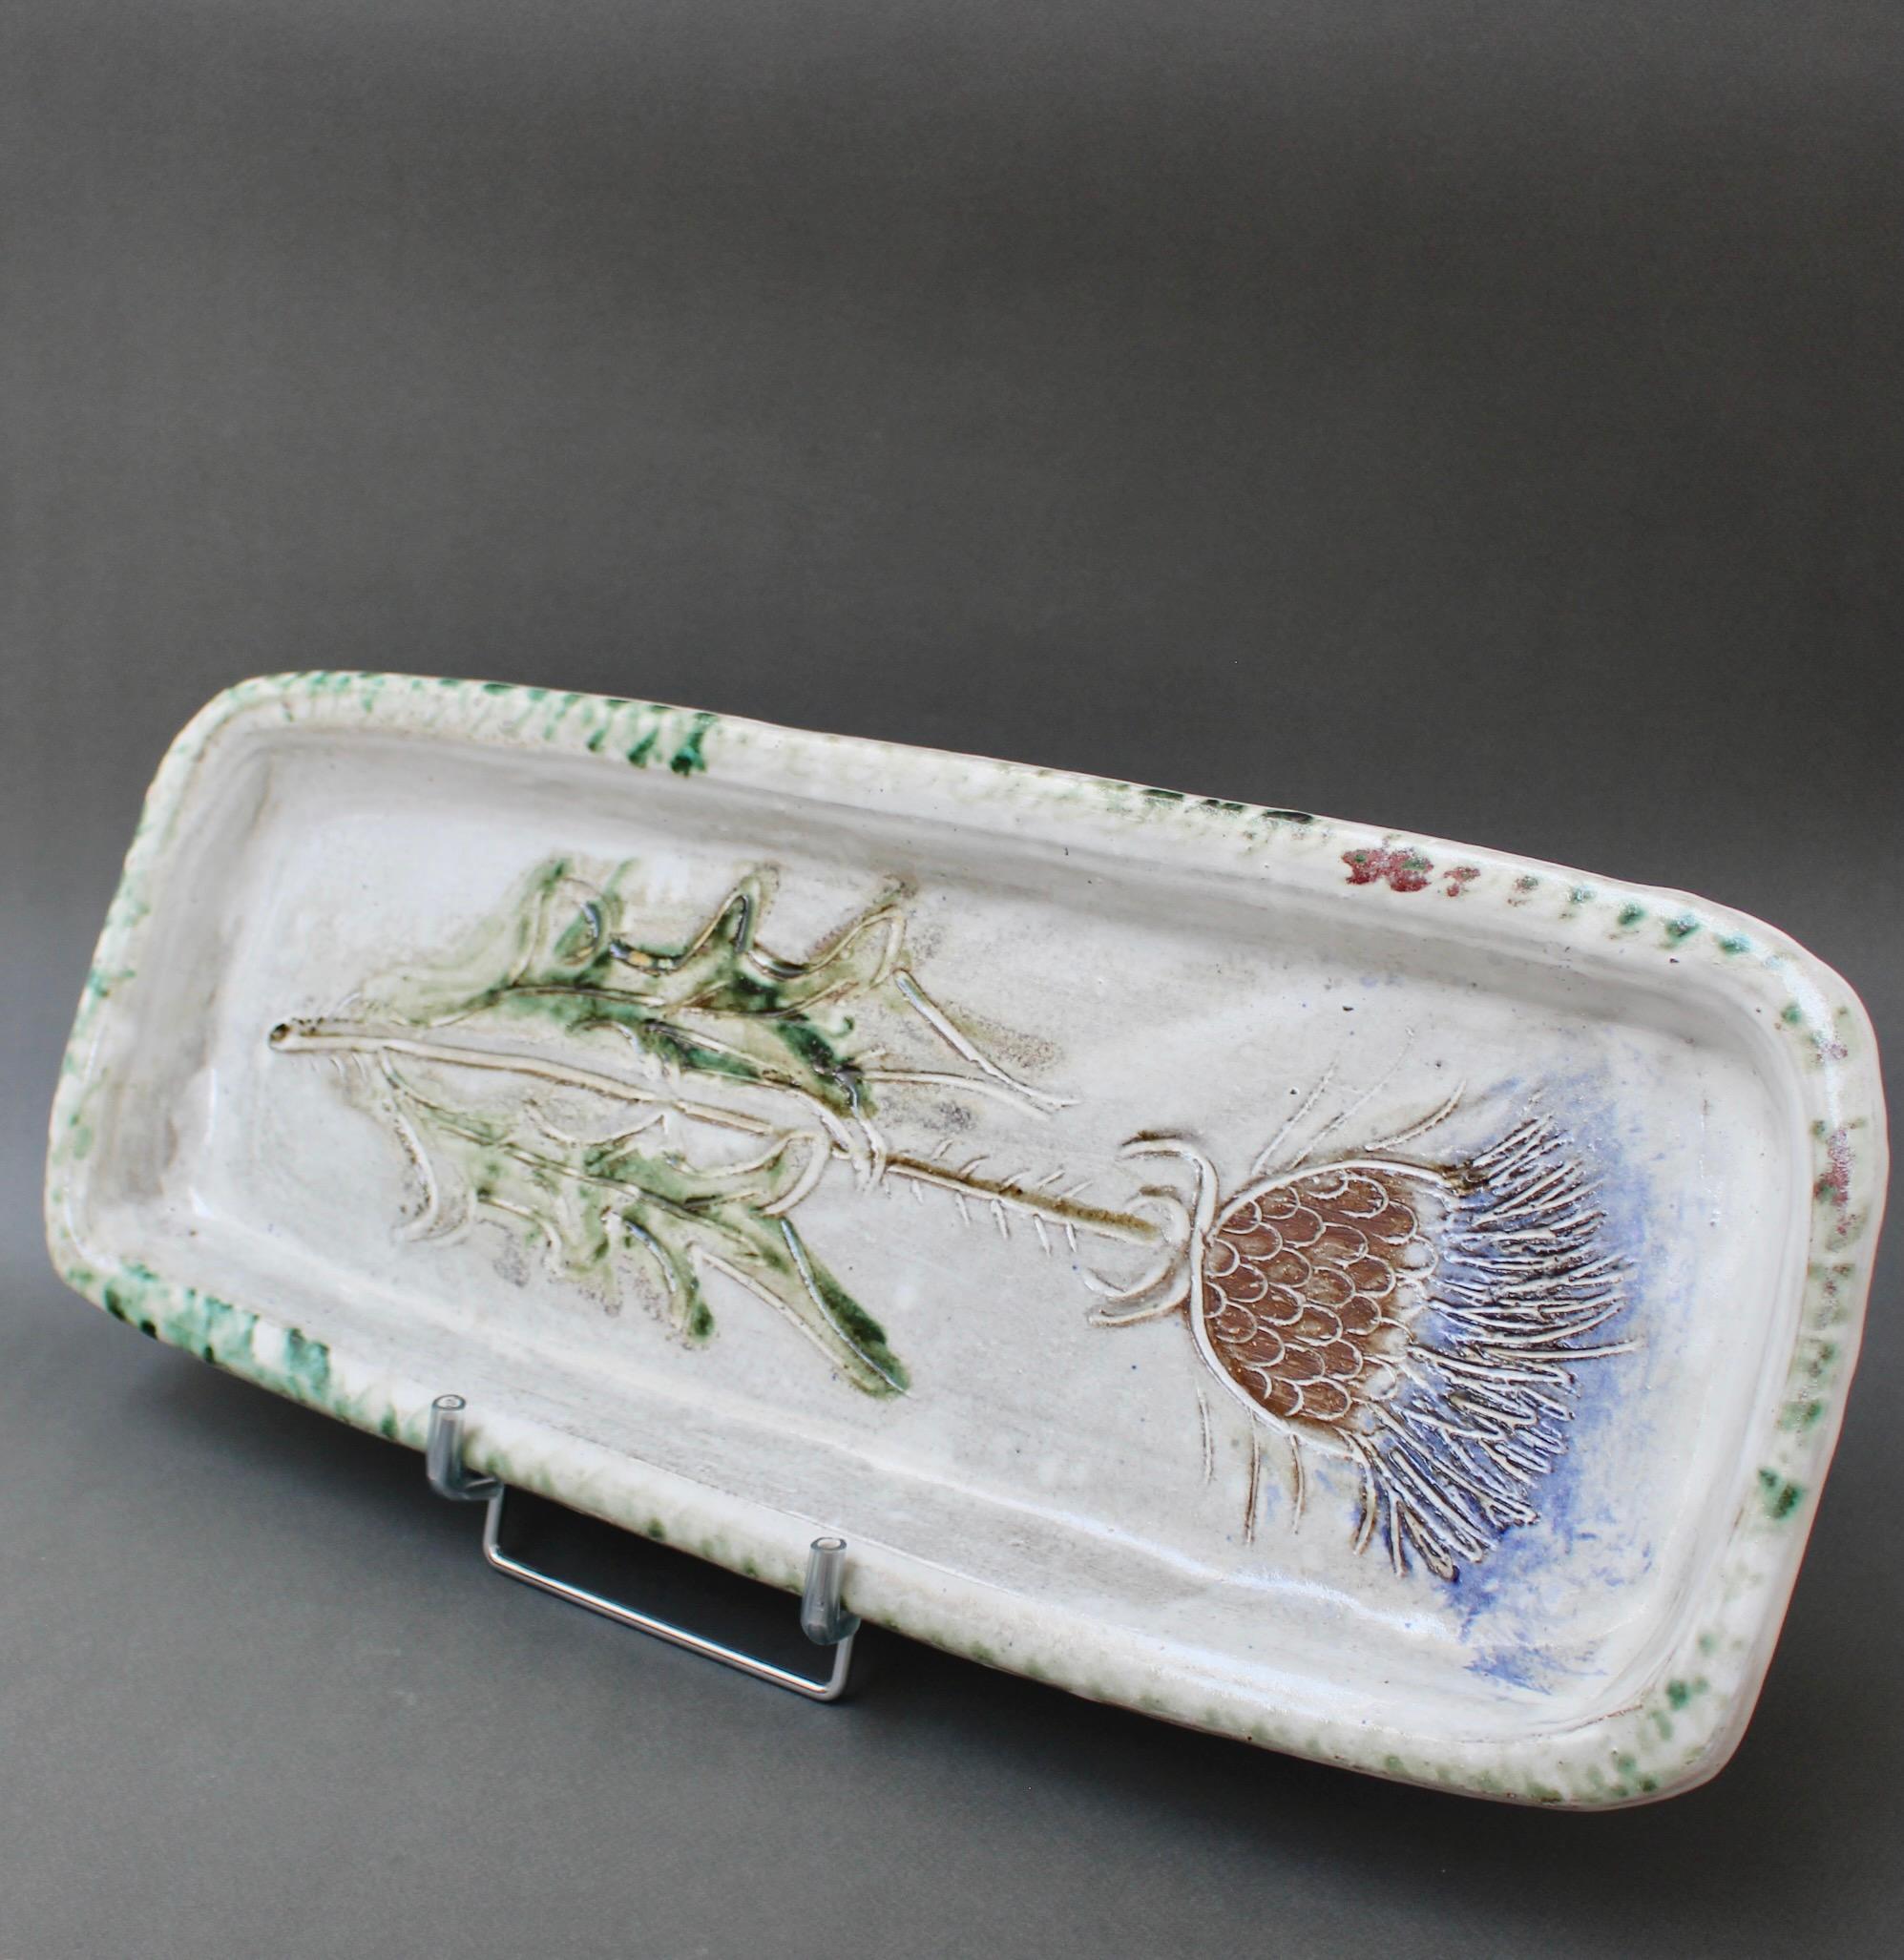 Mid-century decorative tray (circa 1960s) by Albert Thiry. A chalk-white glaze provides the background for a colourful thistle motif in the centre. The rim has touches of earthy green and brown. The flower is incised providing depth tactility. The